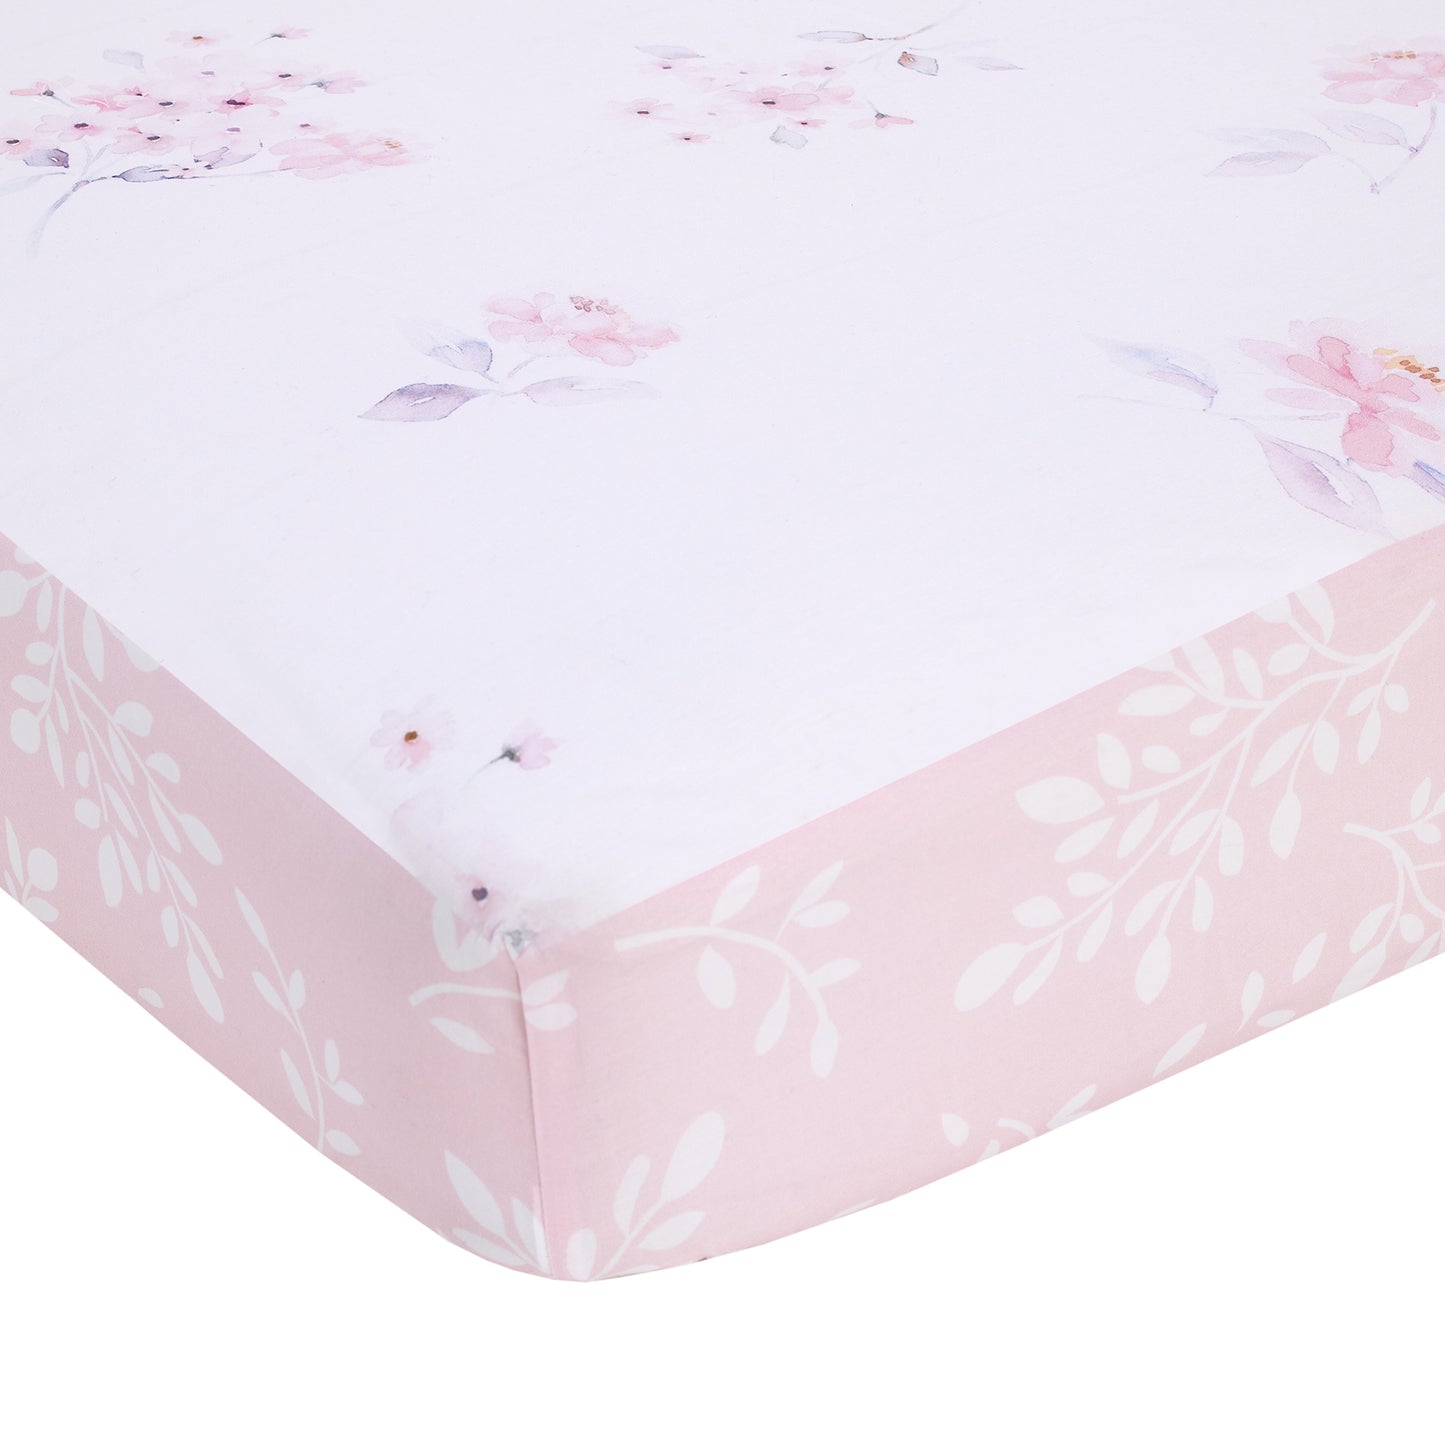 NoJo Flower Bunny Pink, White, and Lavender Bunny Ears 100% Cotton Nursery Photo Op Fitted Crib Sheet